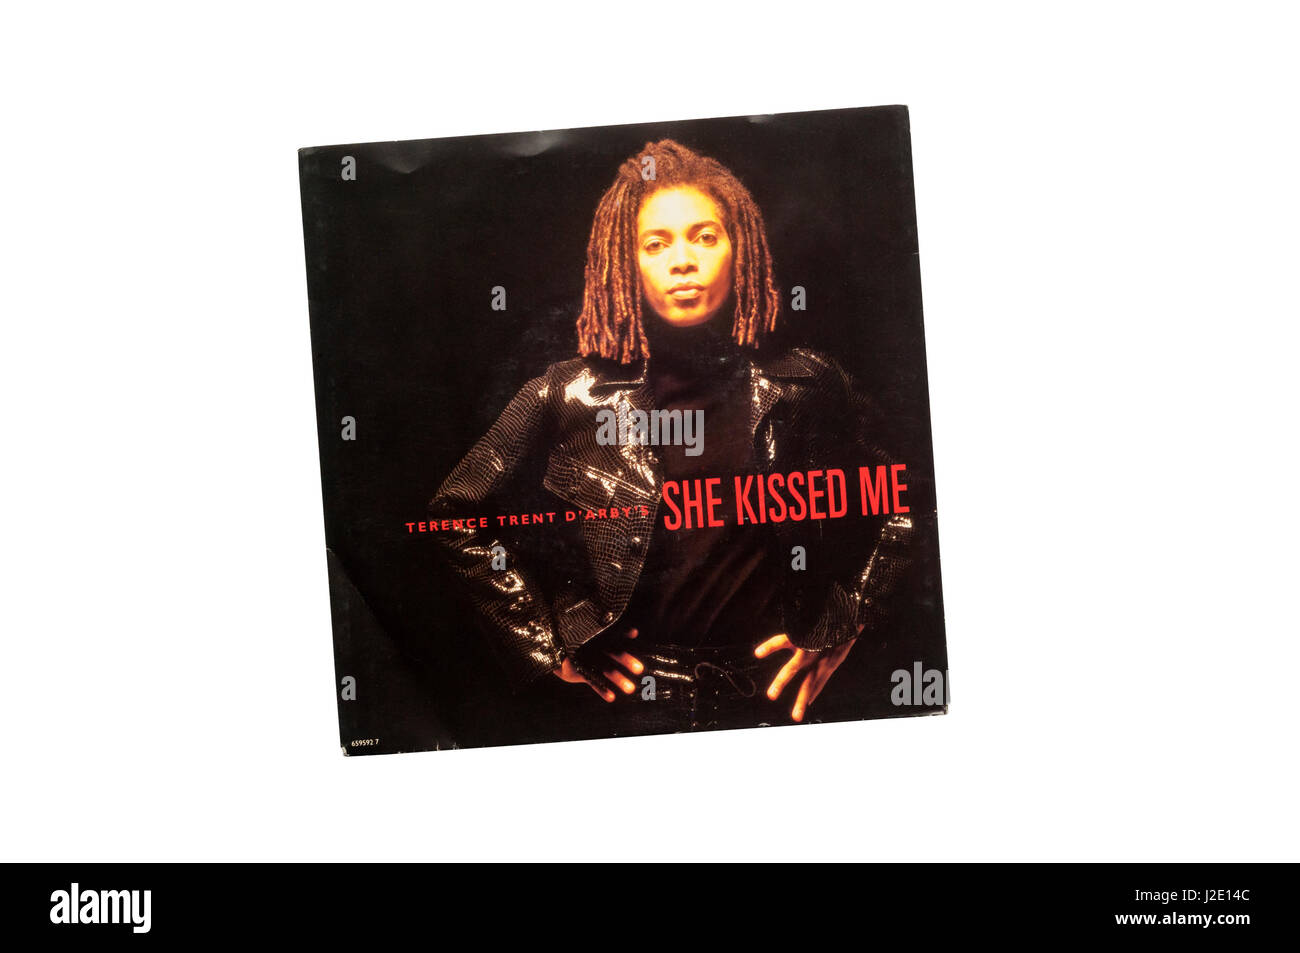 1993 7' single, Terence Trent D'Arby's She Kissed Me. Stock Photo